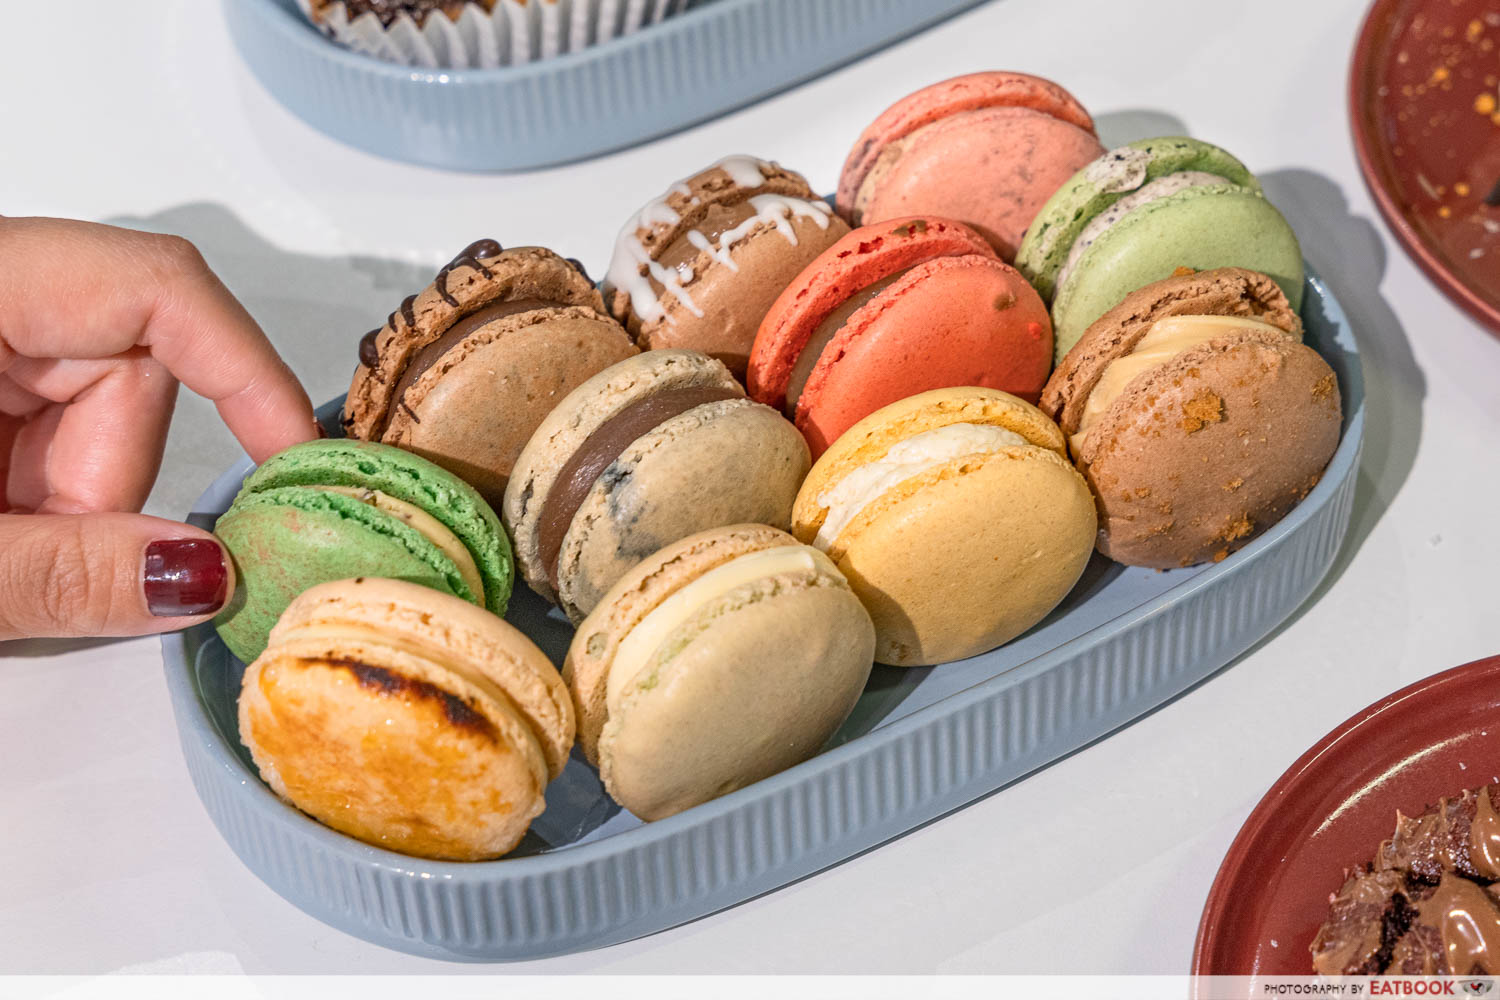 sinful cakes - macarons